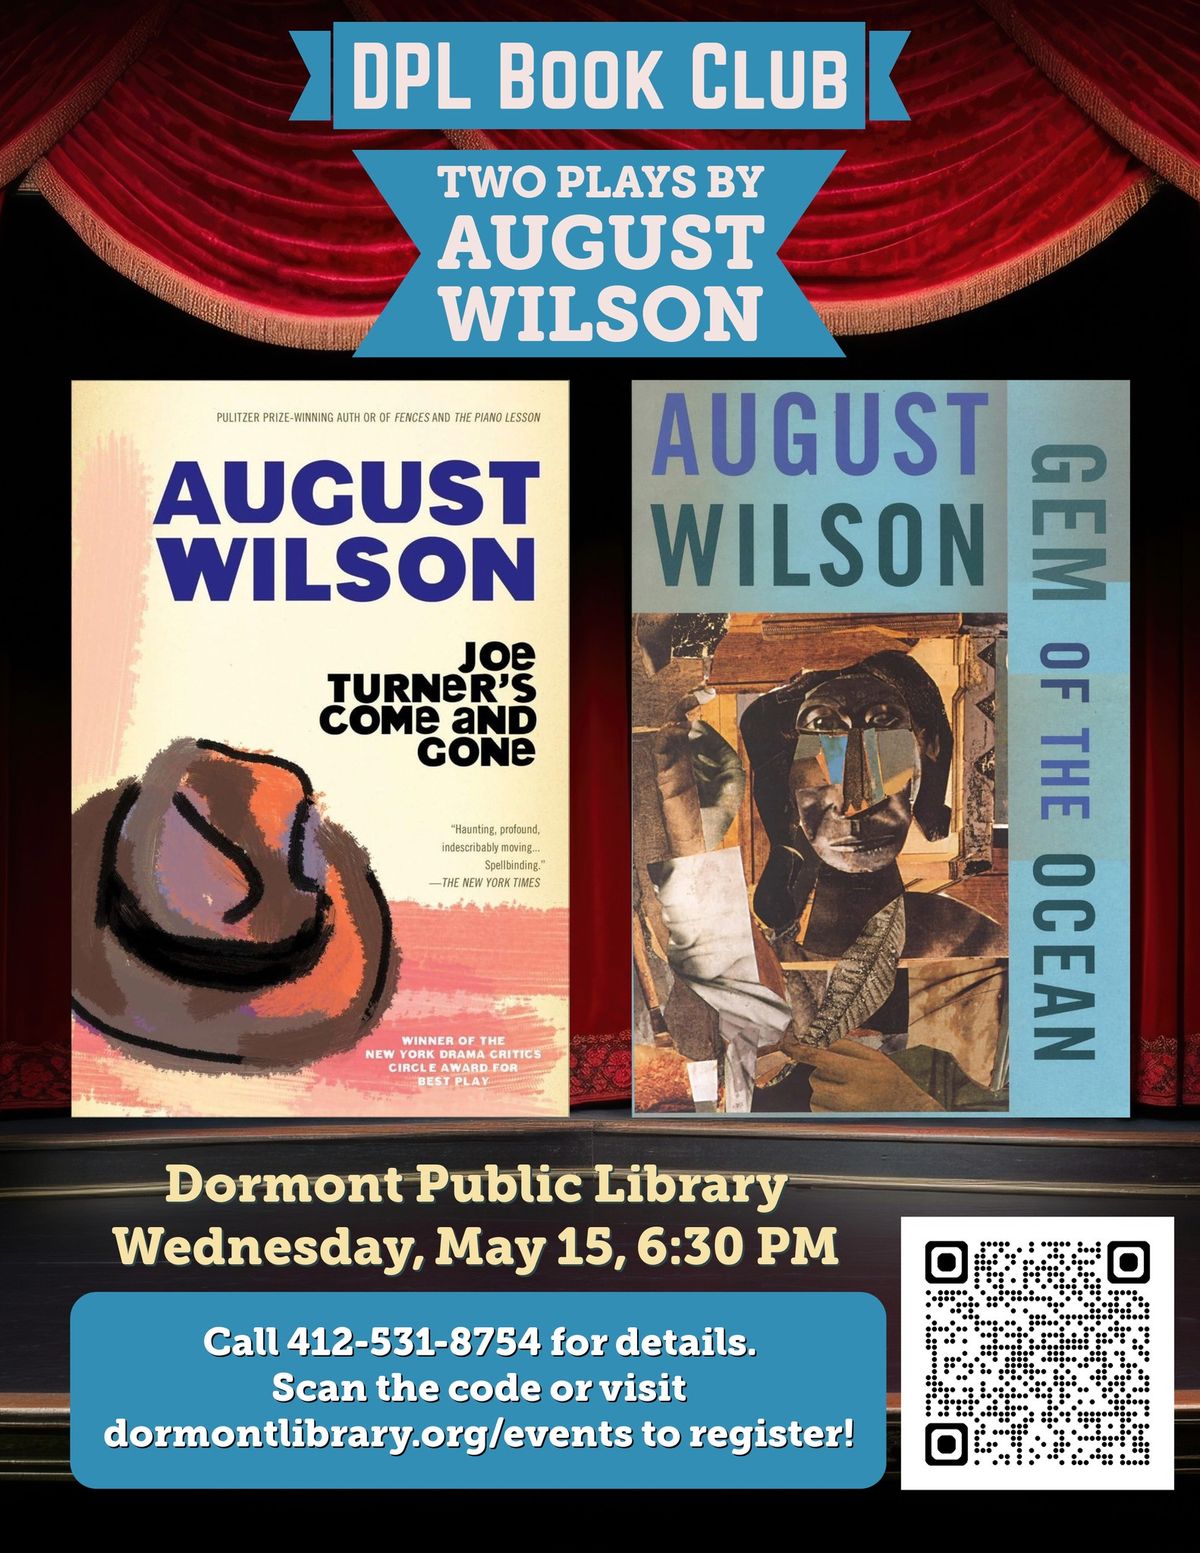 DPL Book Club: Two Plays by August Wilson